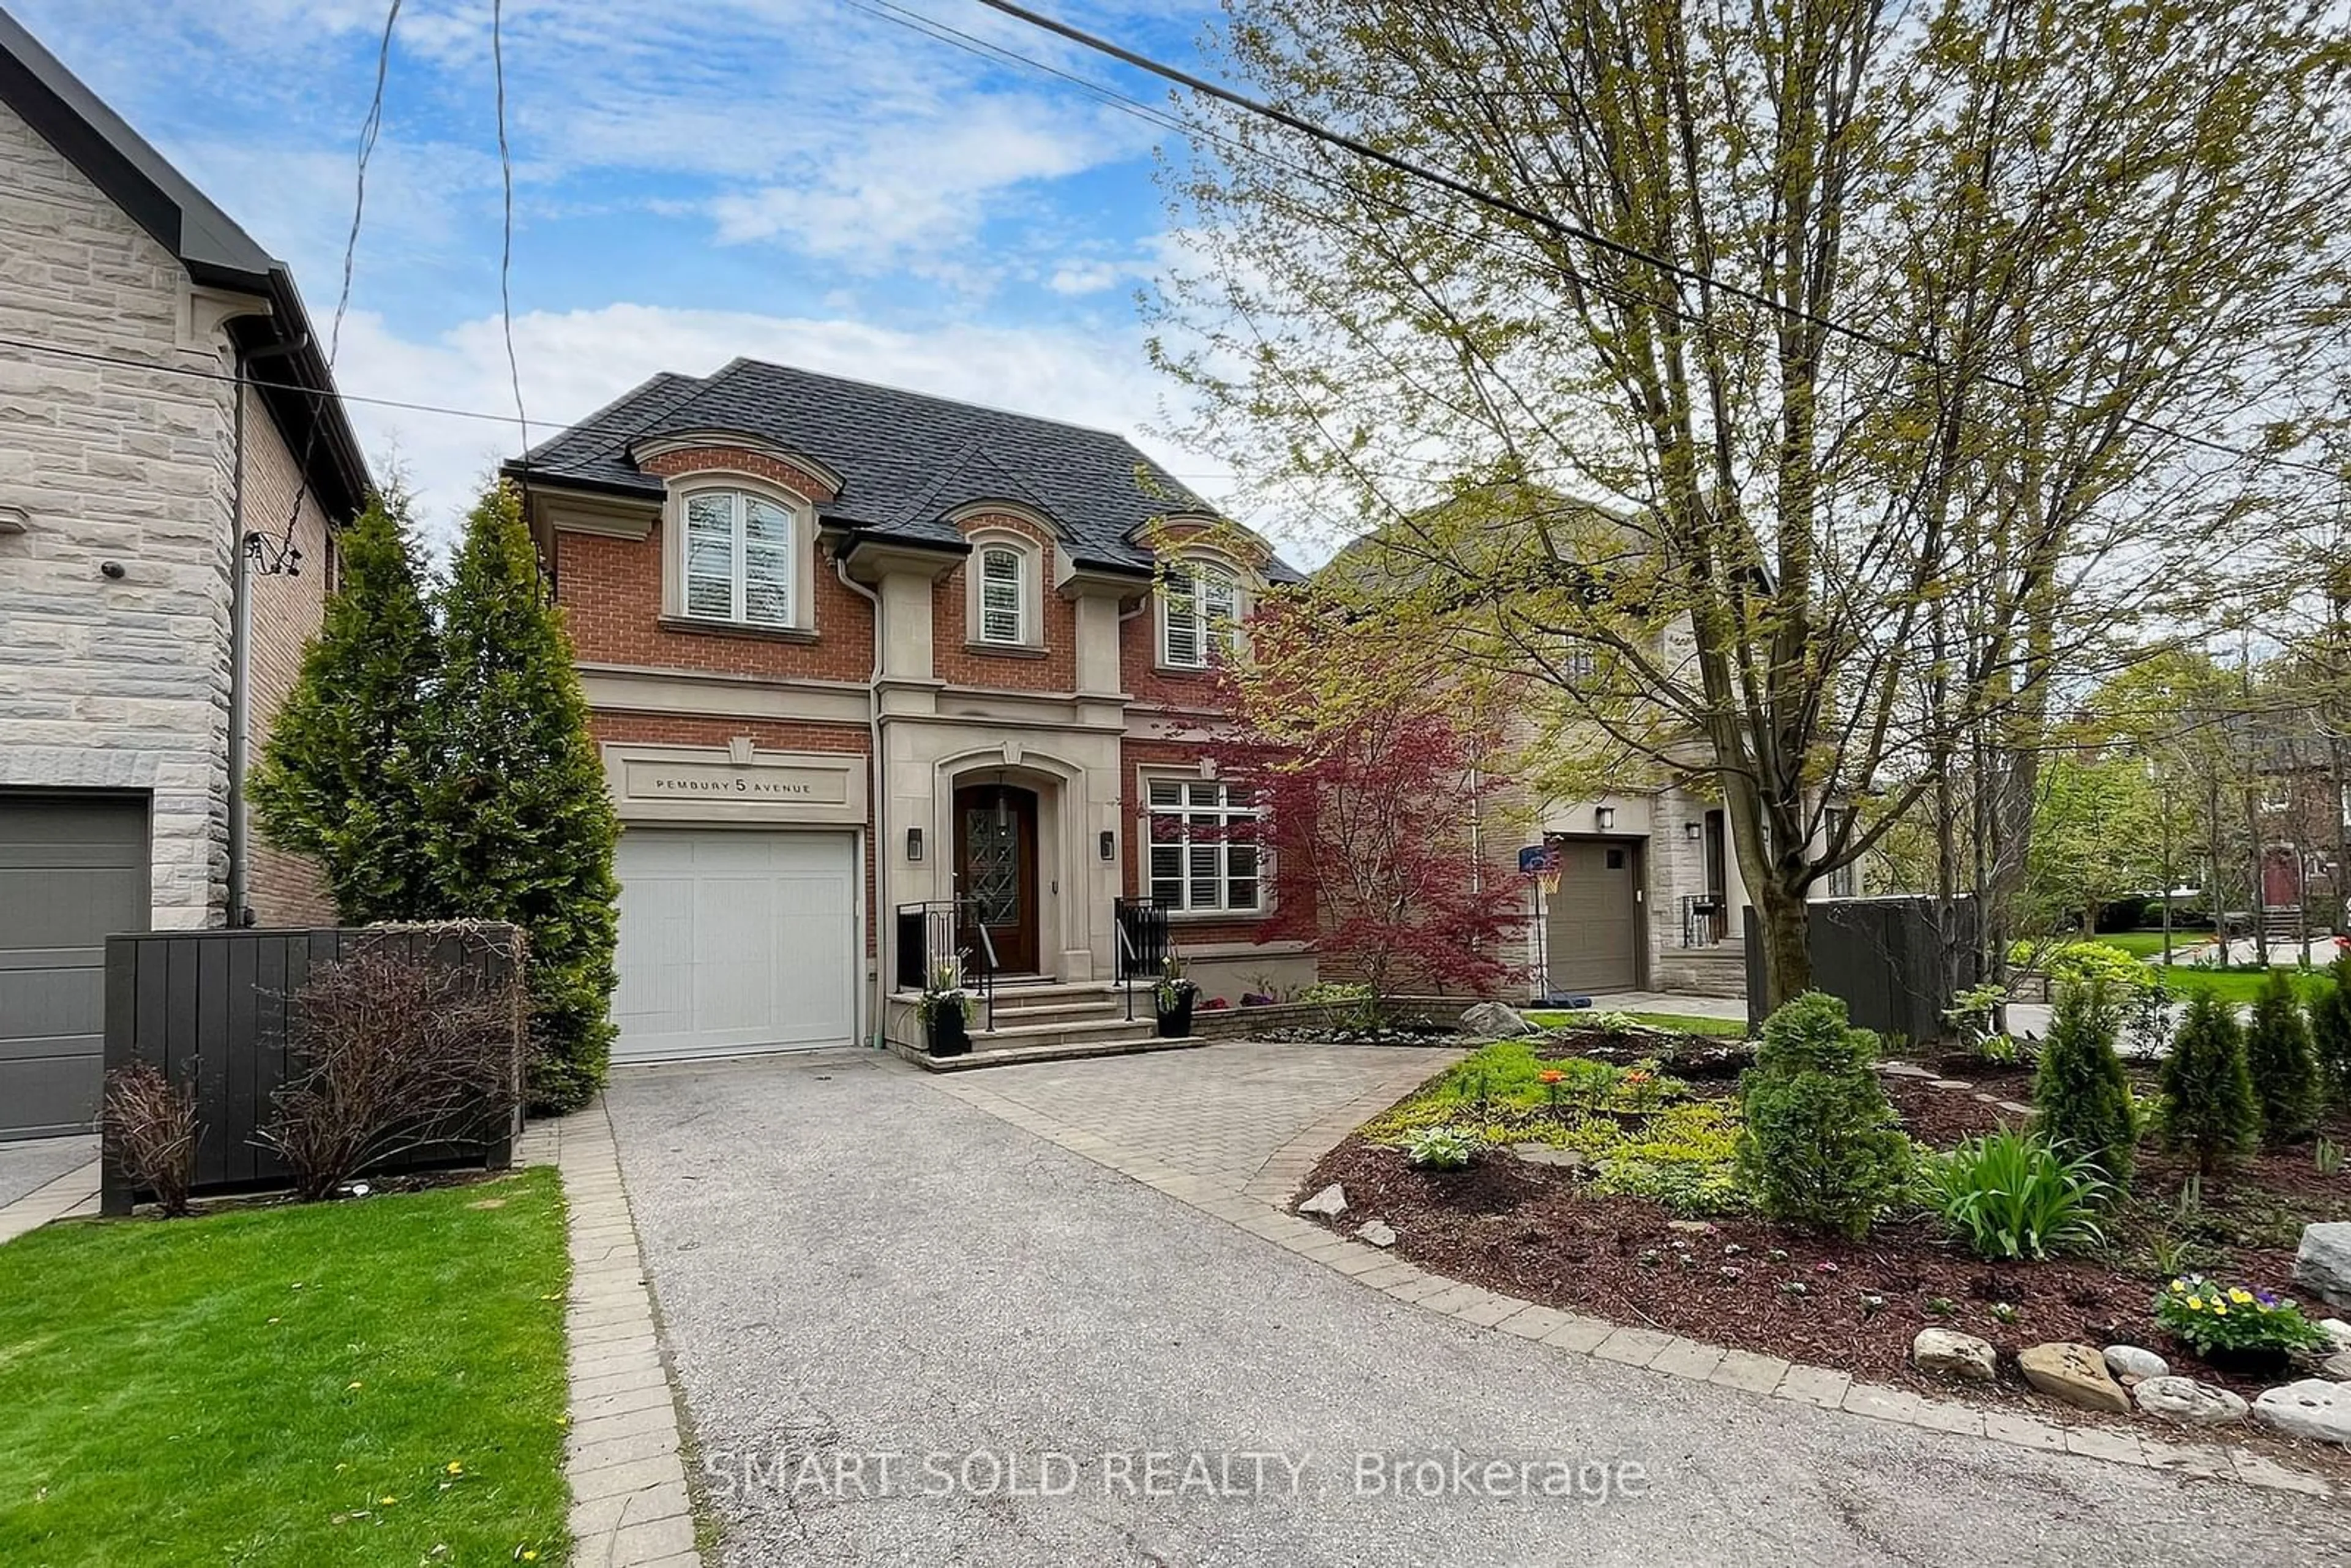 Home with brick exterior material for 5 Pembury Ave, Toronto Ontario M4N 3K4